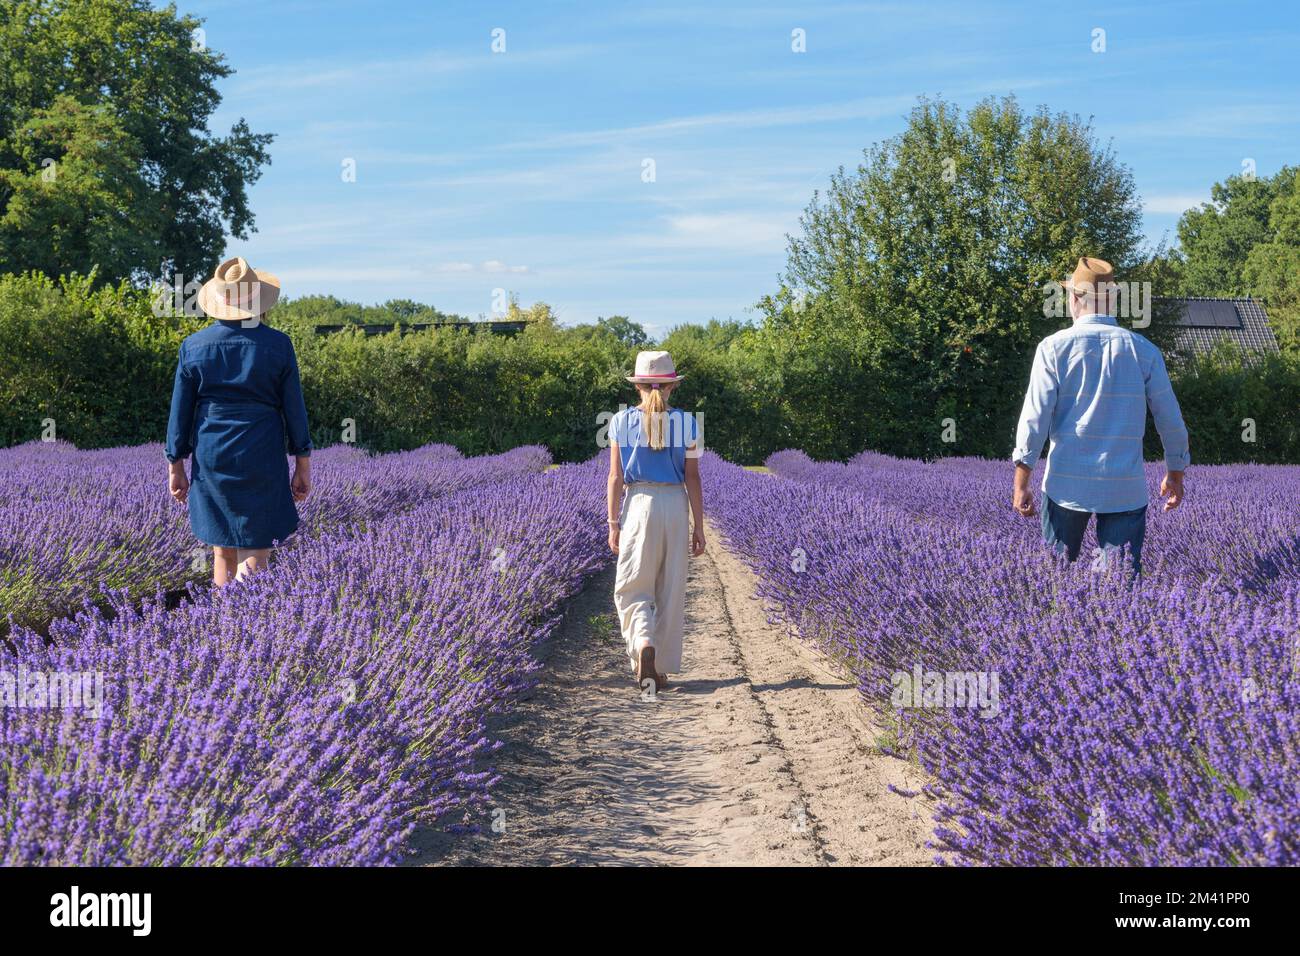 Man woman and girl going along fresh aromatic plantation beds in sunny day perspective. Blue sky. Walking through a lavender field in bloom. Stock Photo